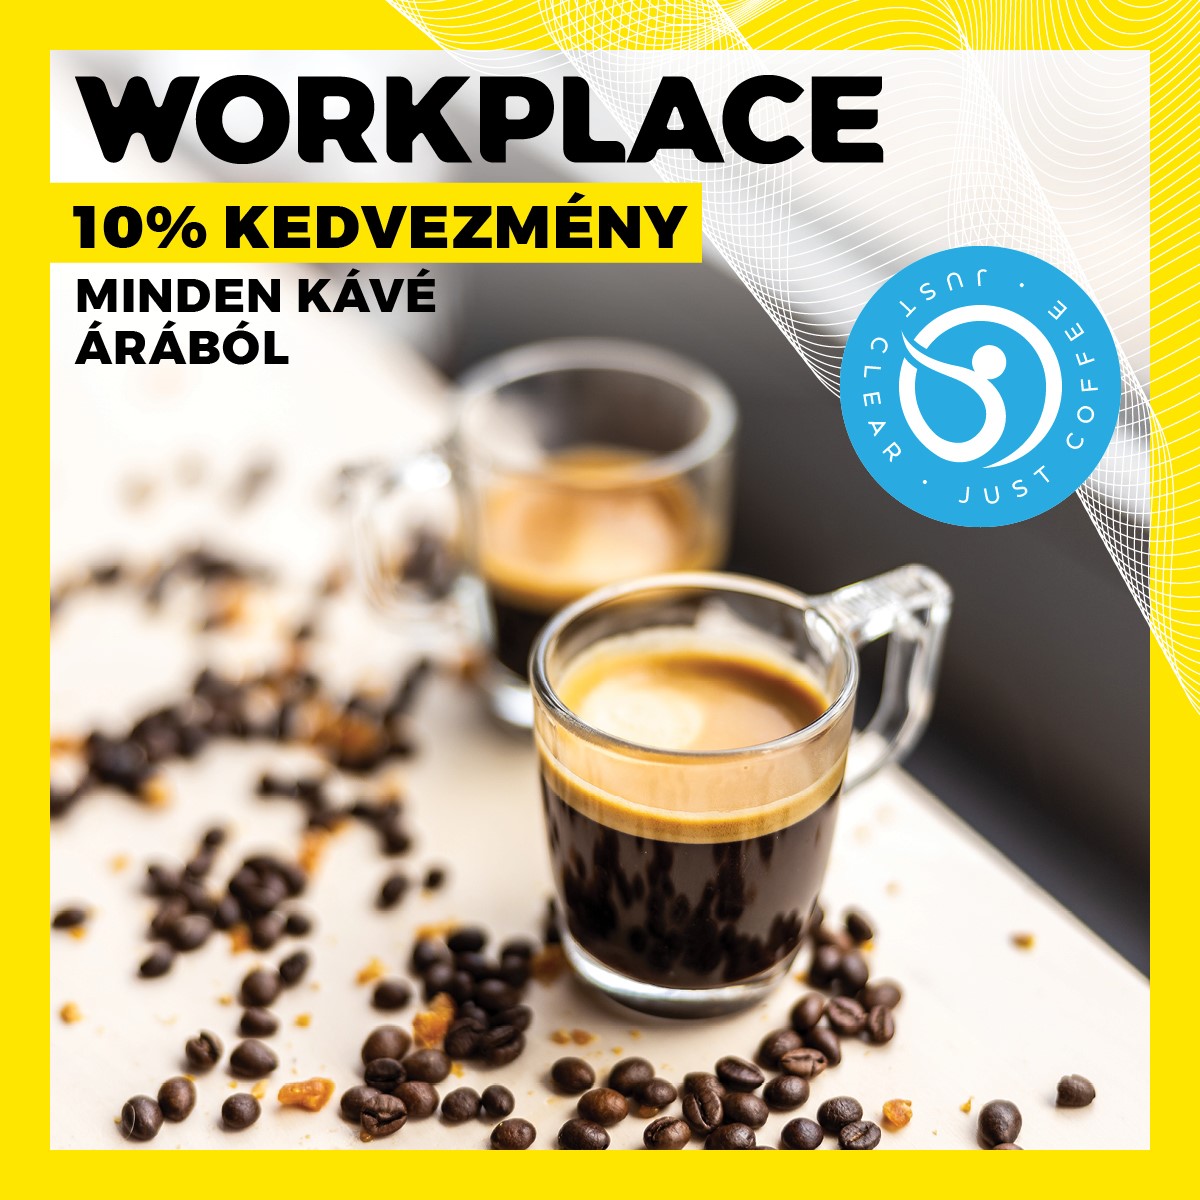 Keresd a Westend appban a Just Clear Coffee Workplace kupont